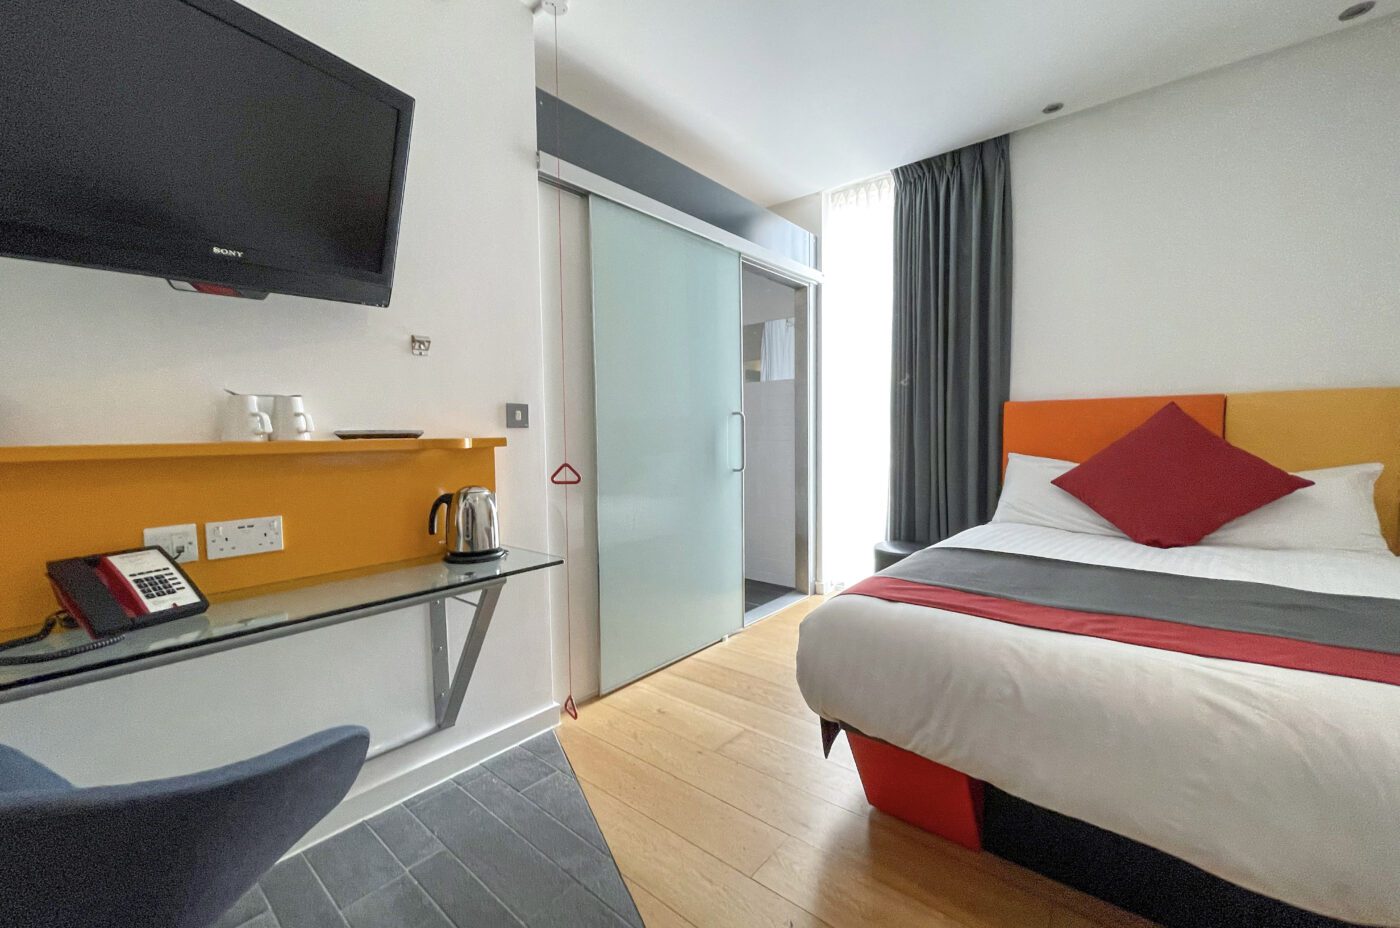 Accessible room with a double bed, table and walk-in bathroom.